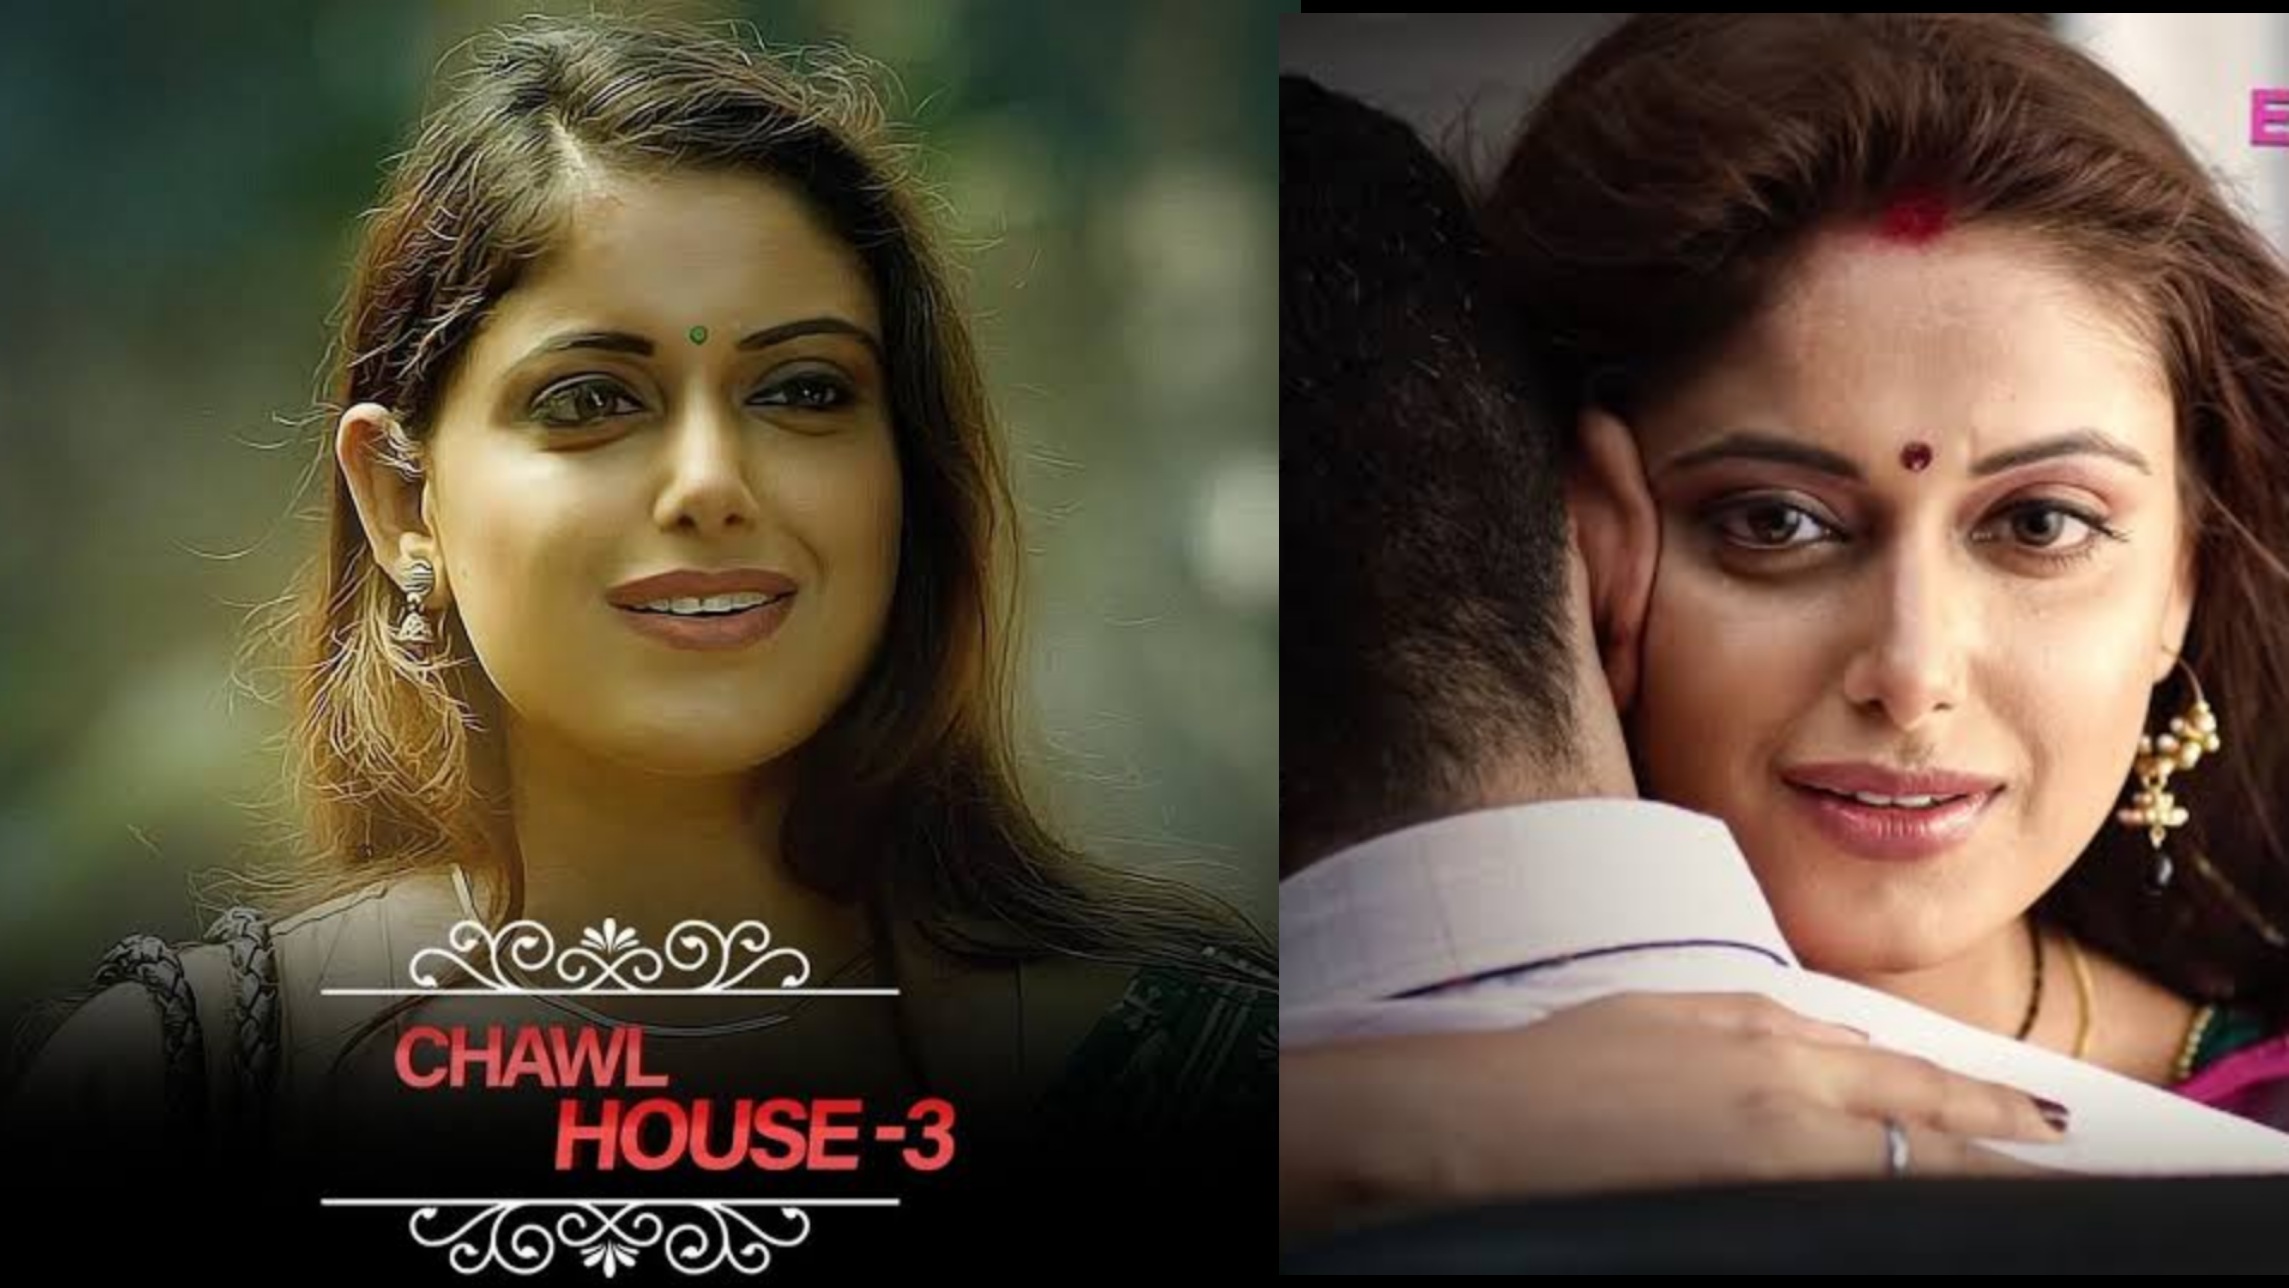 Charmsukh Chawl House 3 all episodes | How to Download All episodes Charmsukh Chawl House 3 | Charmsukh Chawl House 2 Full Review in Hindi/English Full Story Explanation,